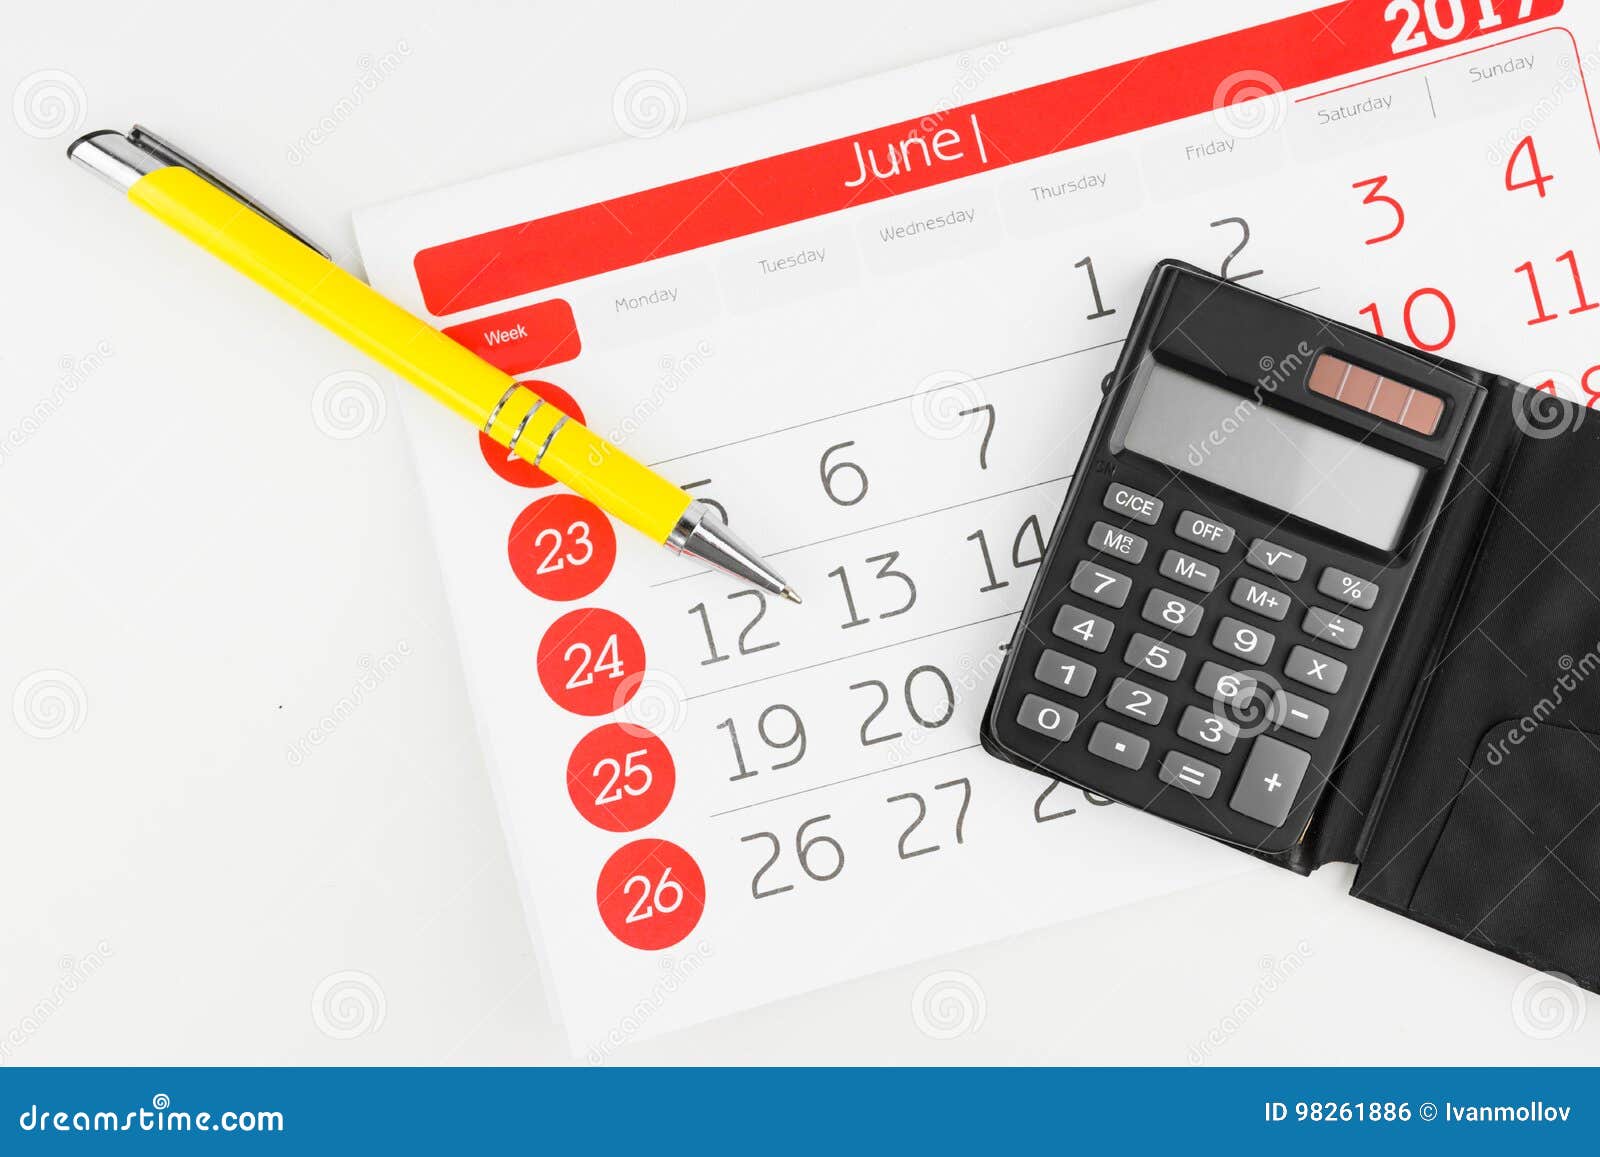 Calendar Days with Calculator and Pen Stock Photo Image of paper